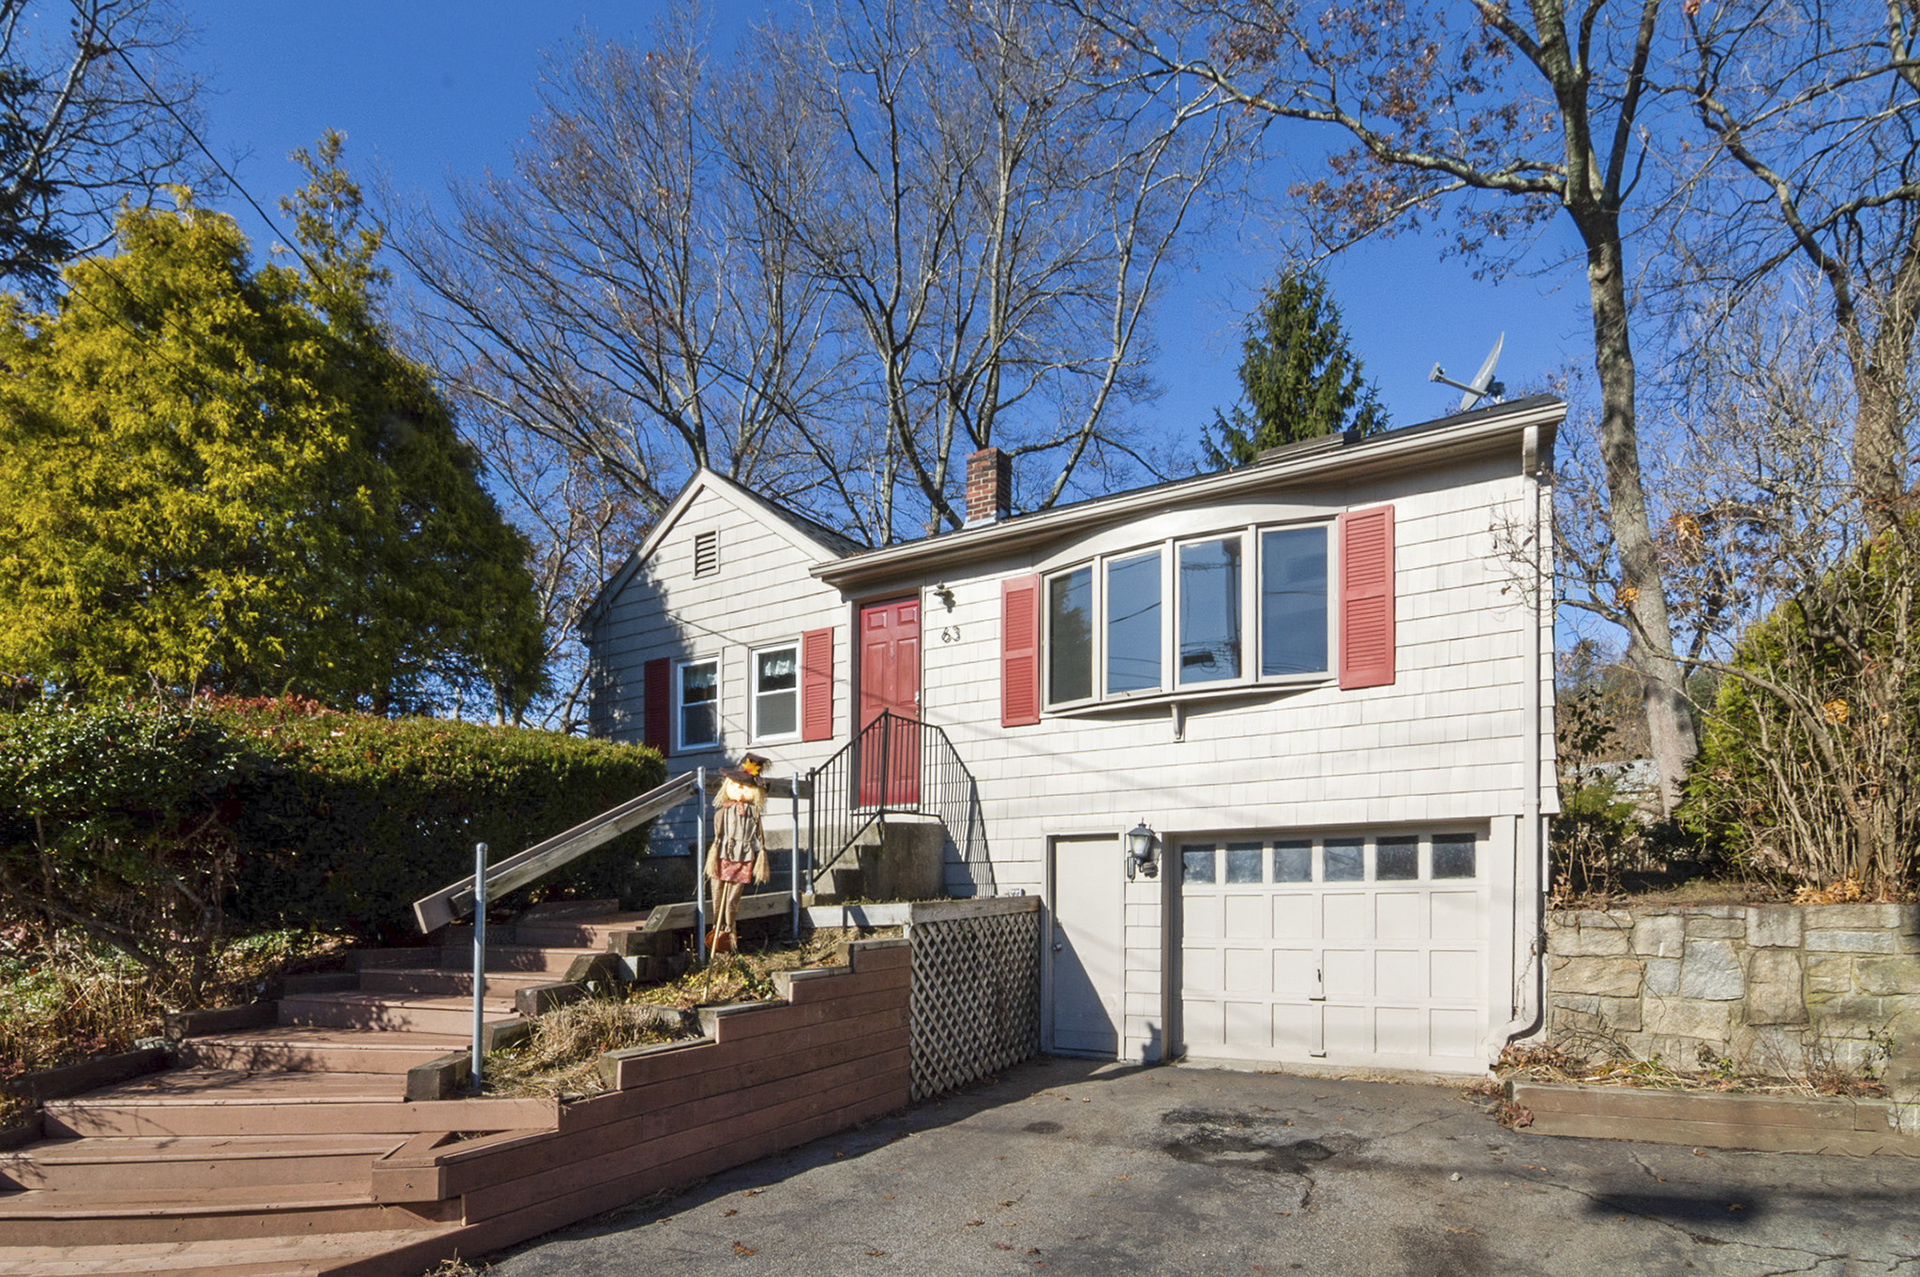 63 Twin Lakes Ave, Coventry, Rhode Island I Sat 12/7 from 11:30-1:00PM